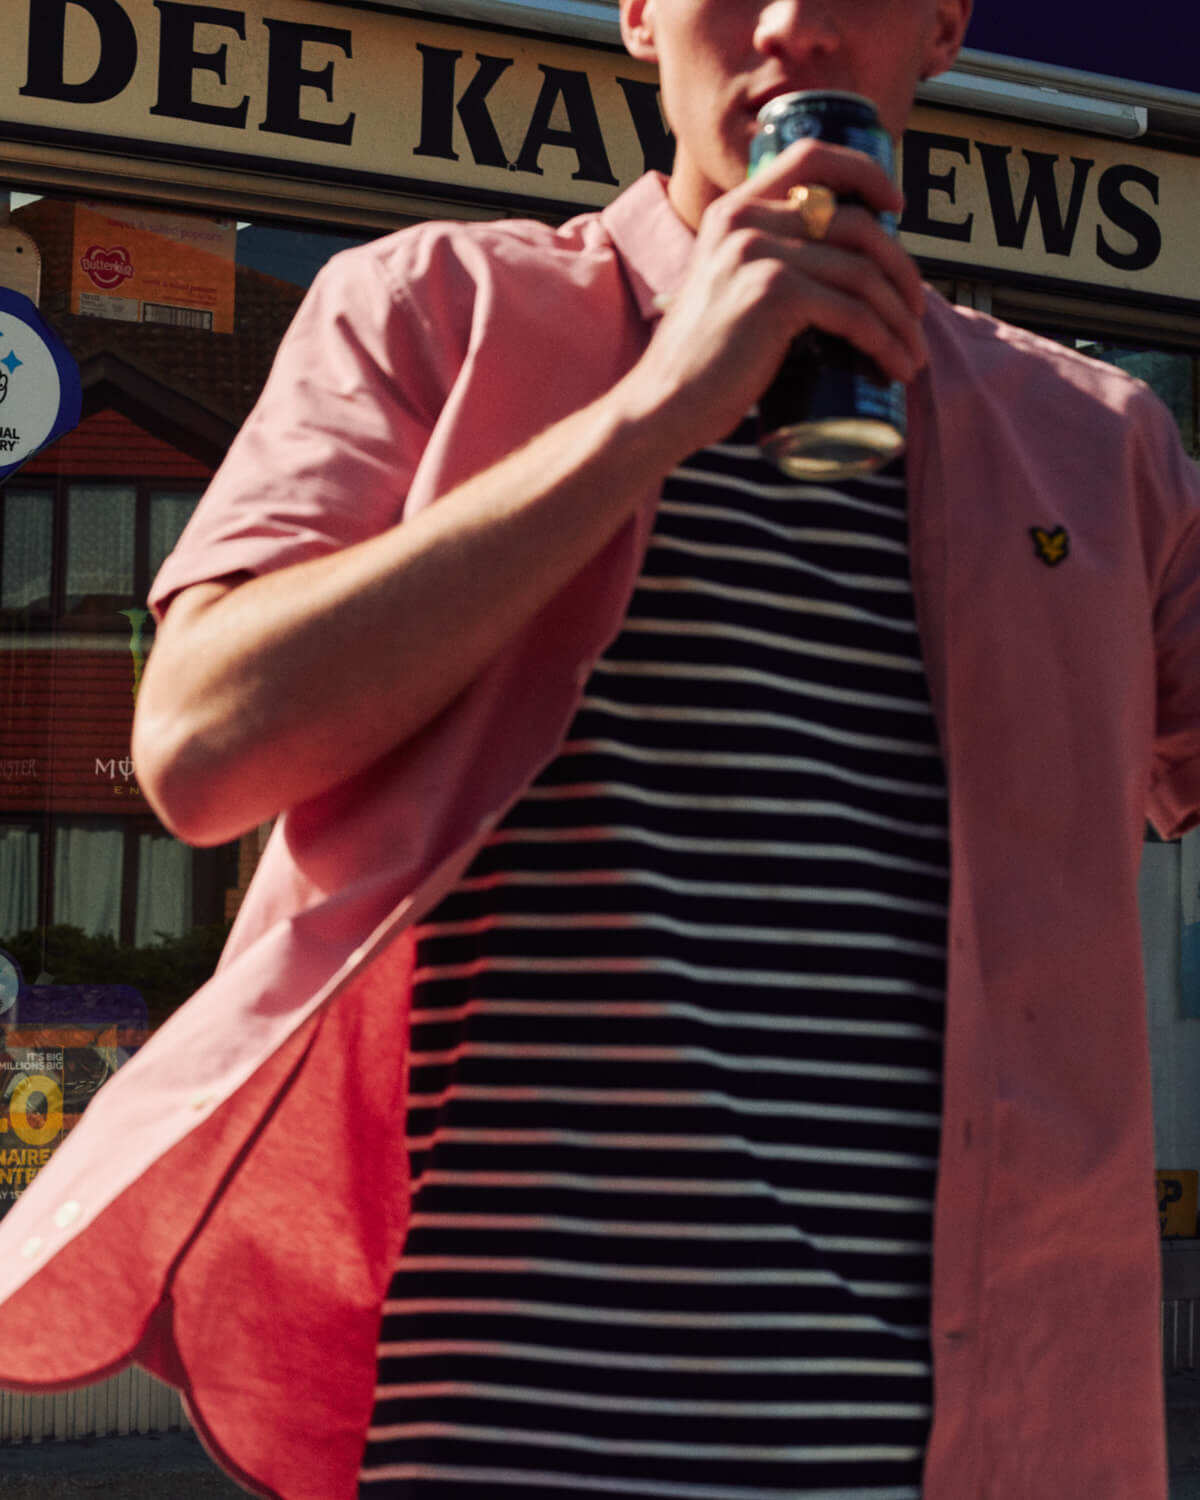 Lad by newsagent shop, by lifestyle photographer 